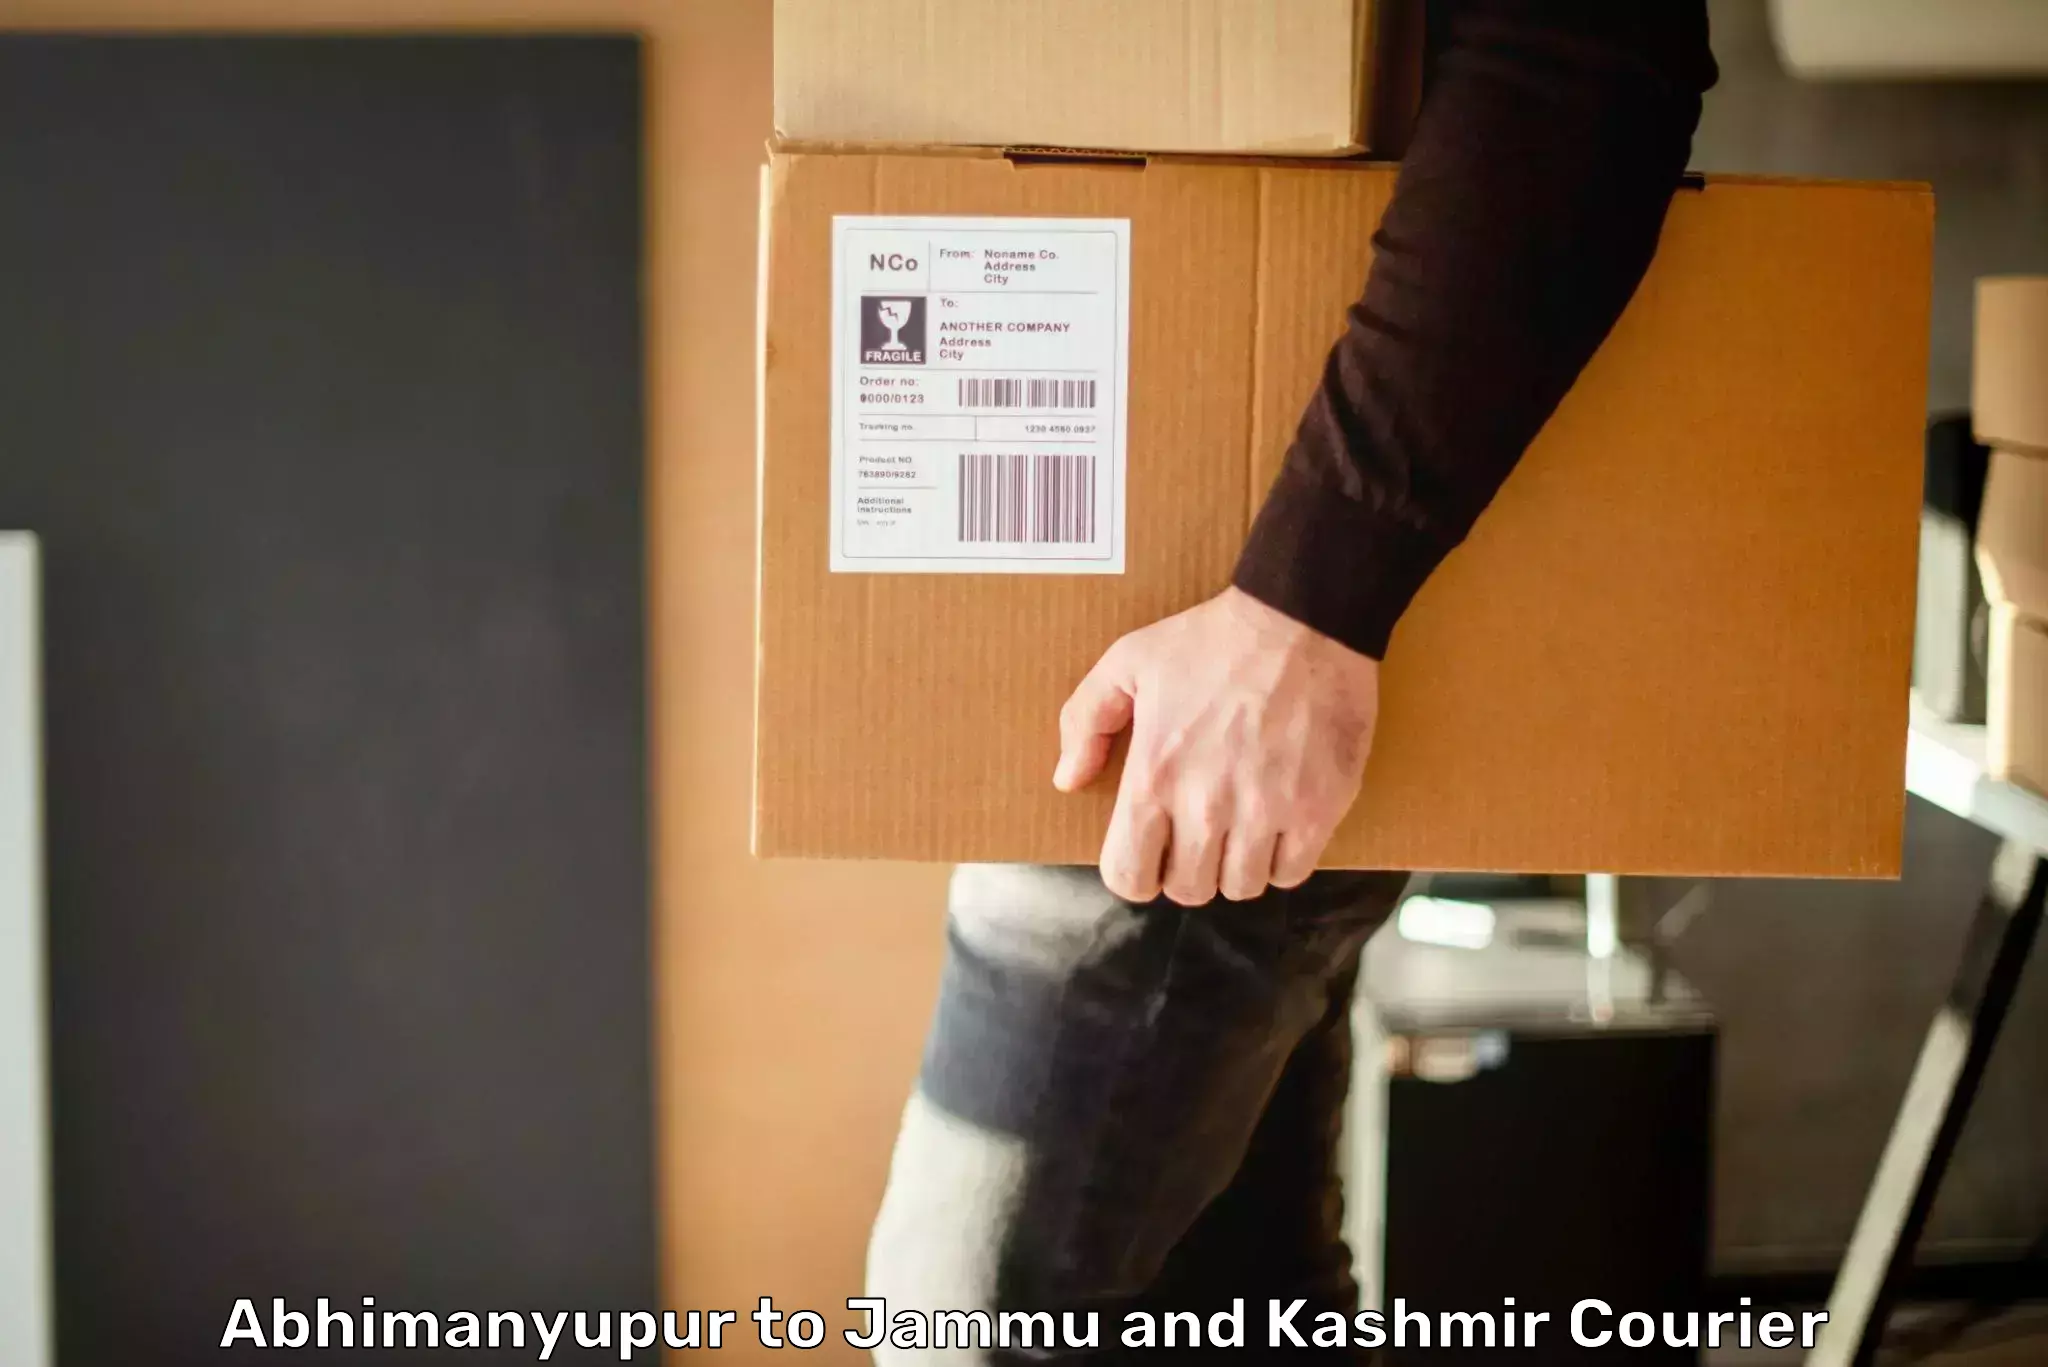 Courier service efficiency Abhimanyupur to Jammu